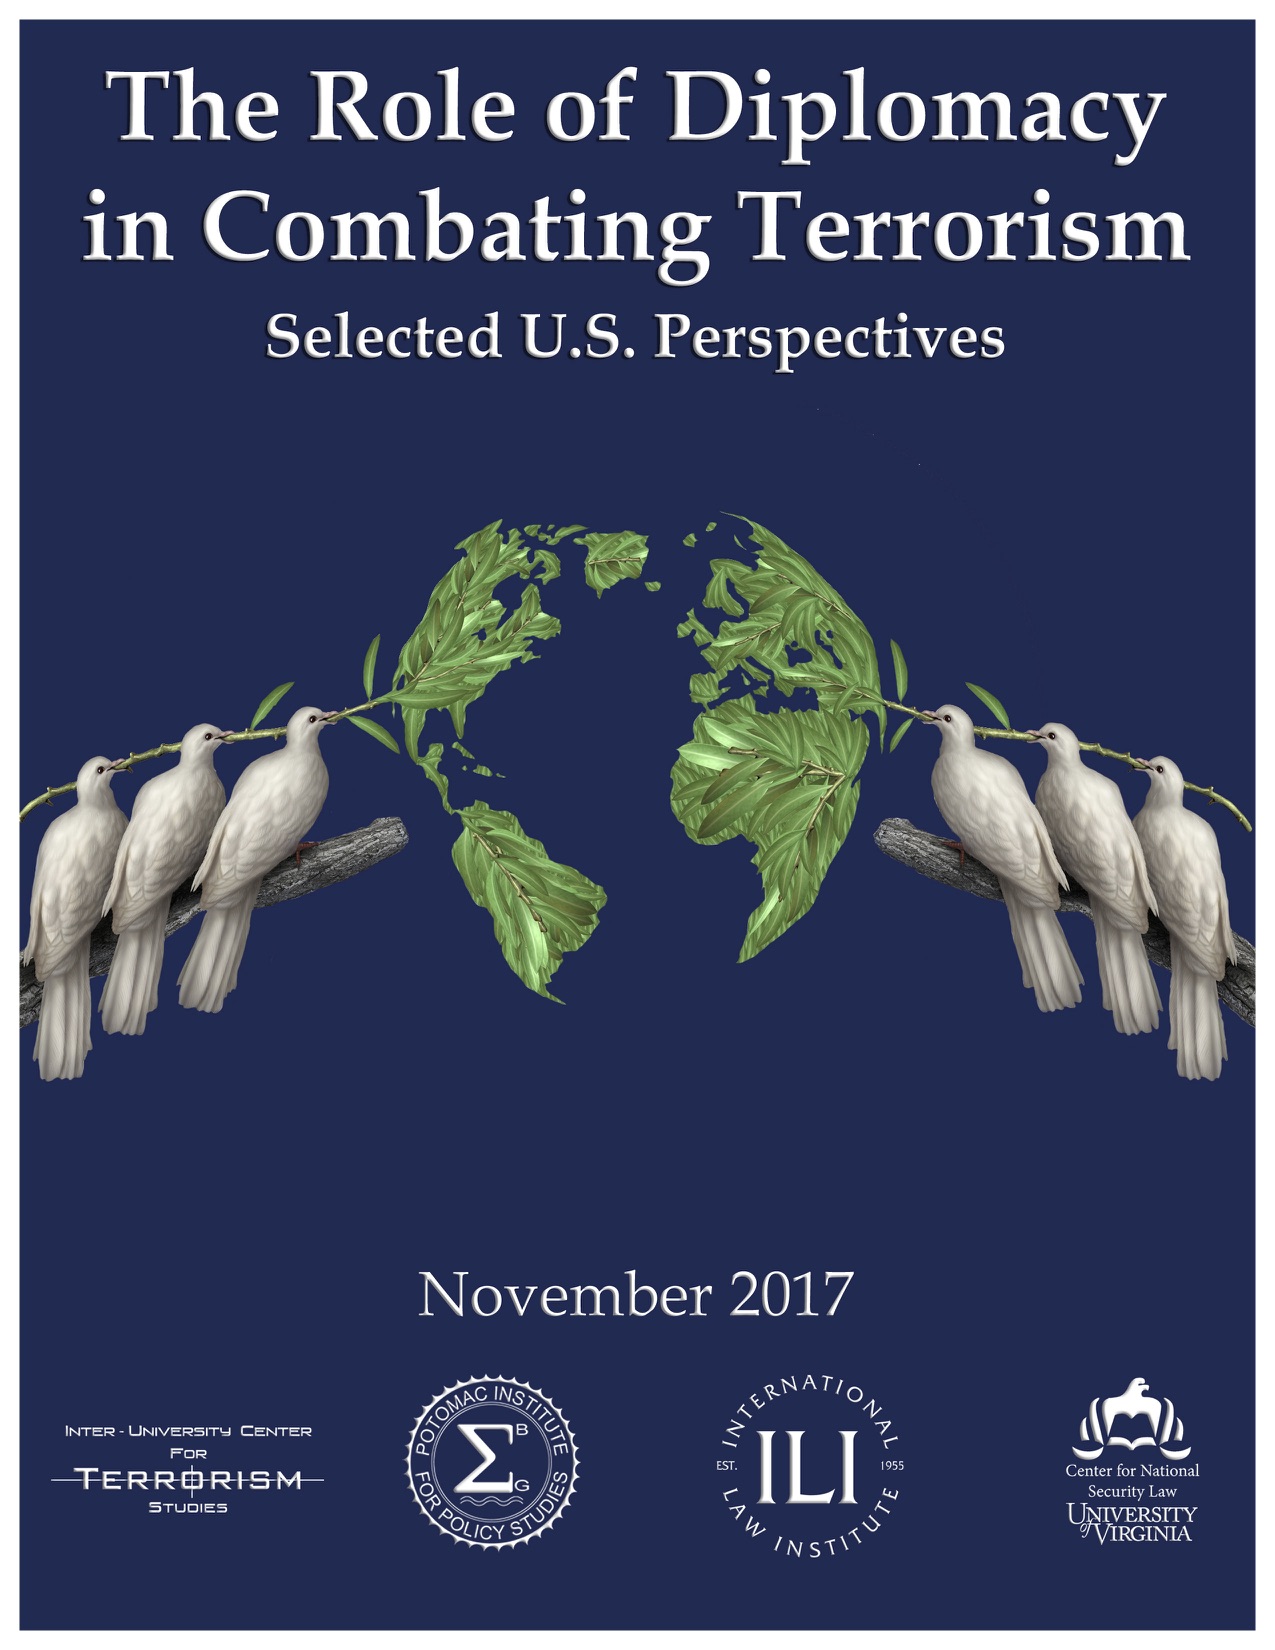 The Role of Diplomacy in Combating Terrorism: Selected U.S. Perspectives